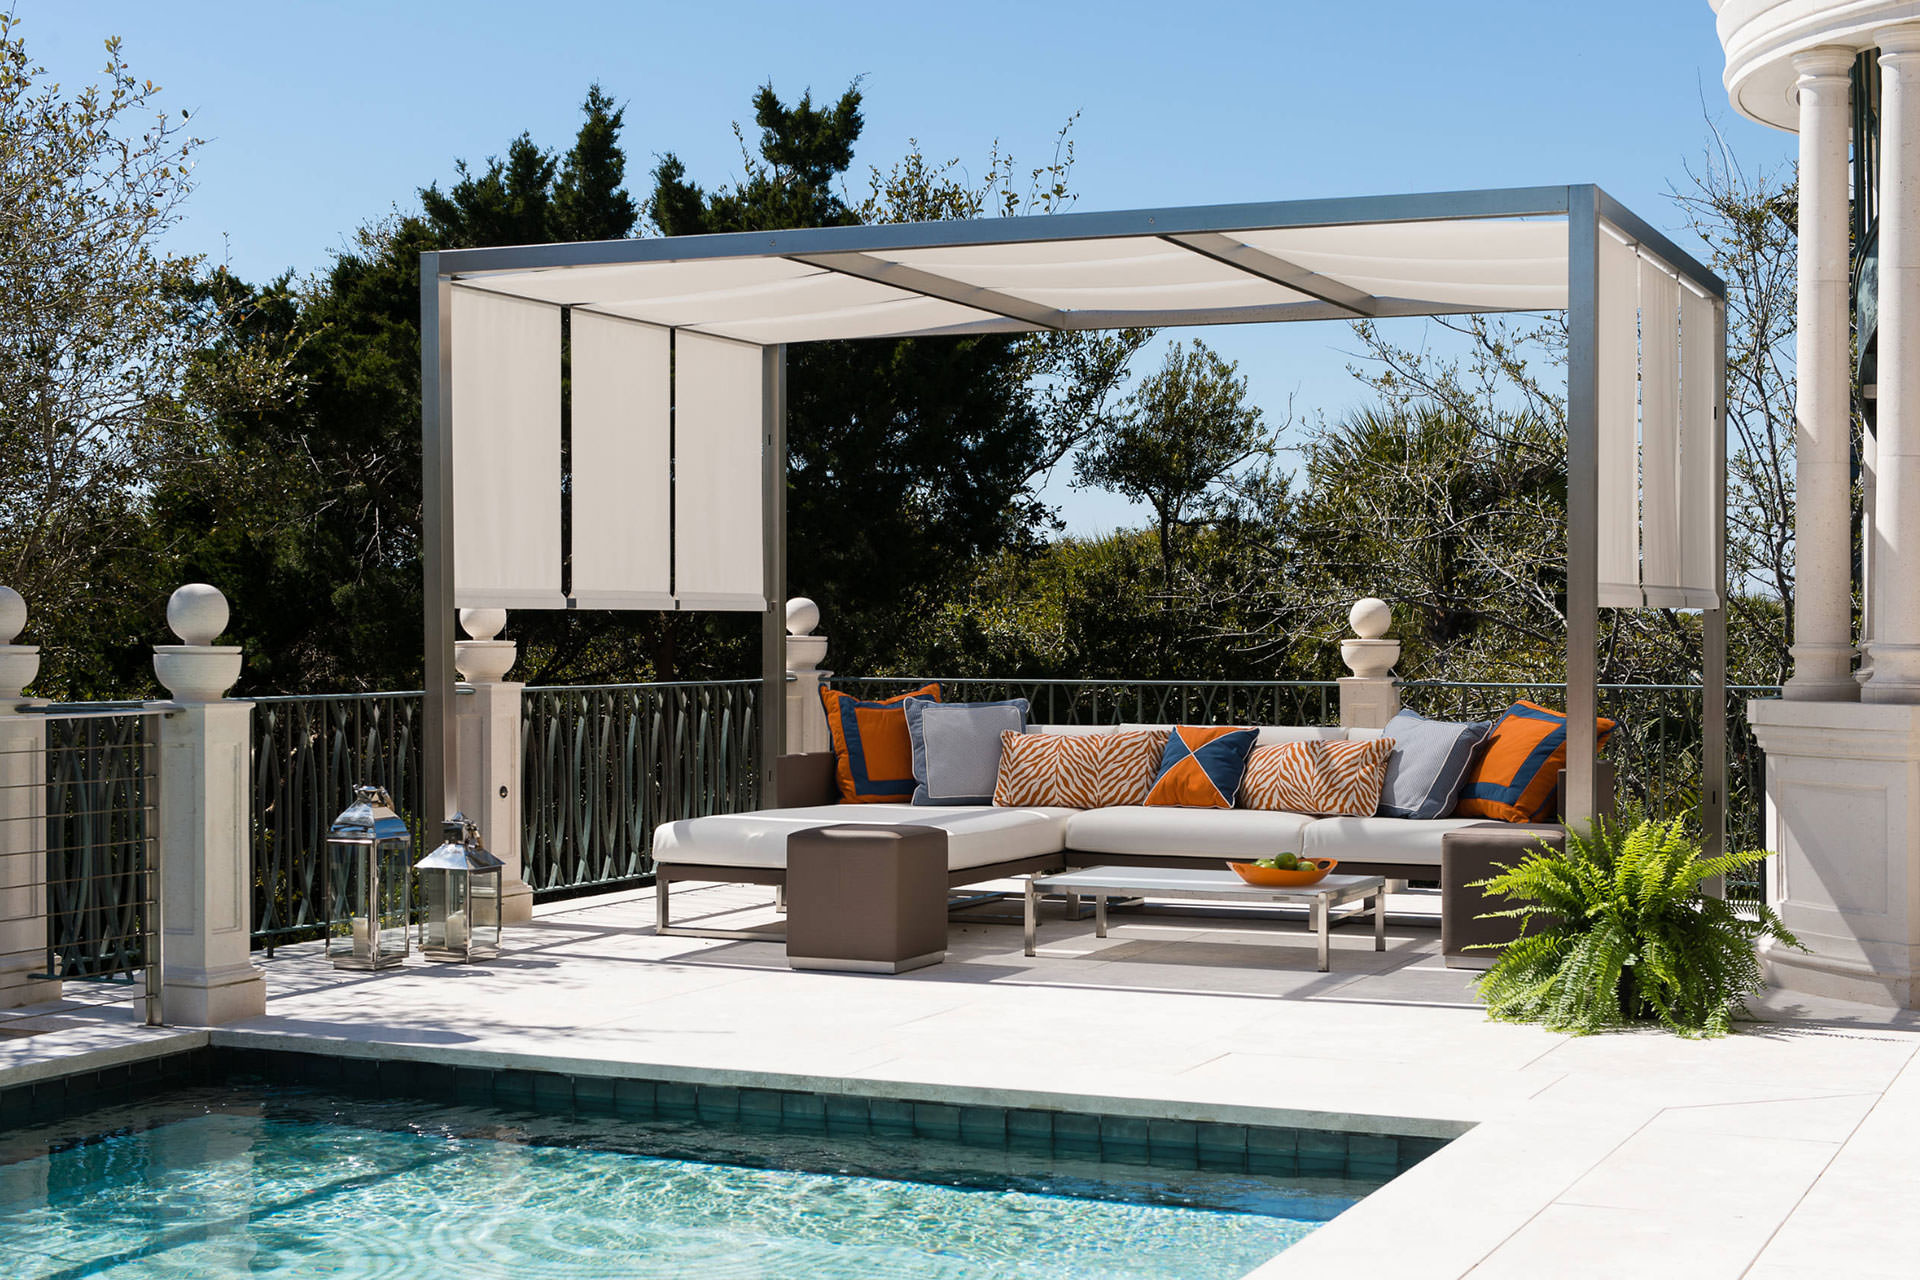 Pergola Roof Ideas What You Need To Know Shadefx Canopies,Tanqueray Gin And Tonic Recipe